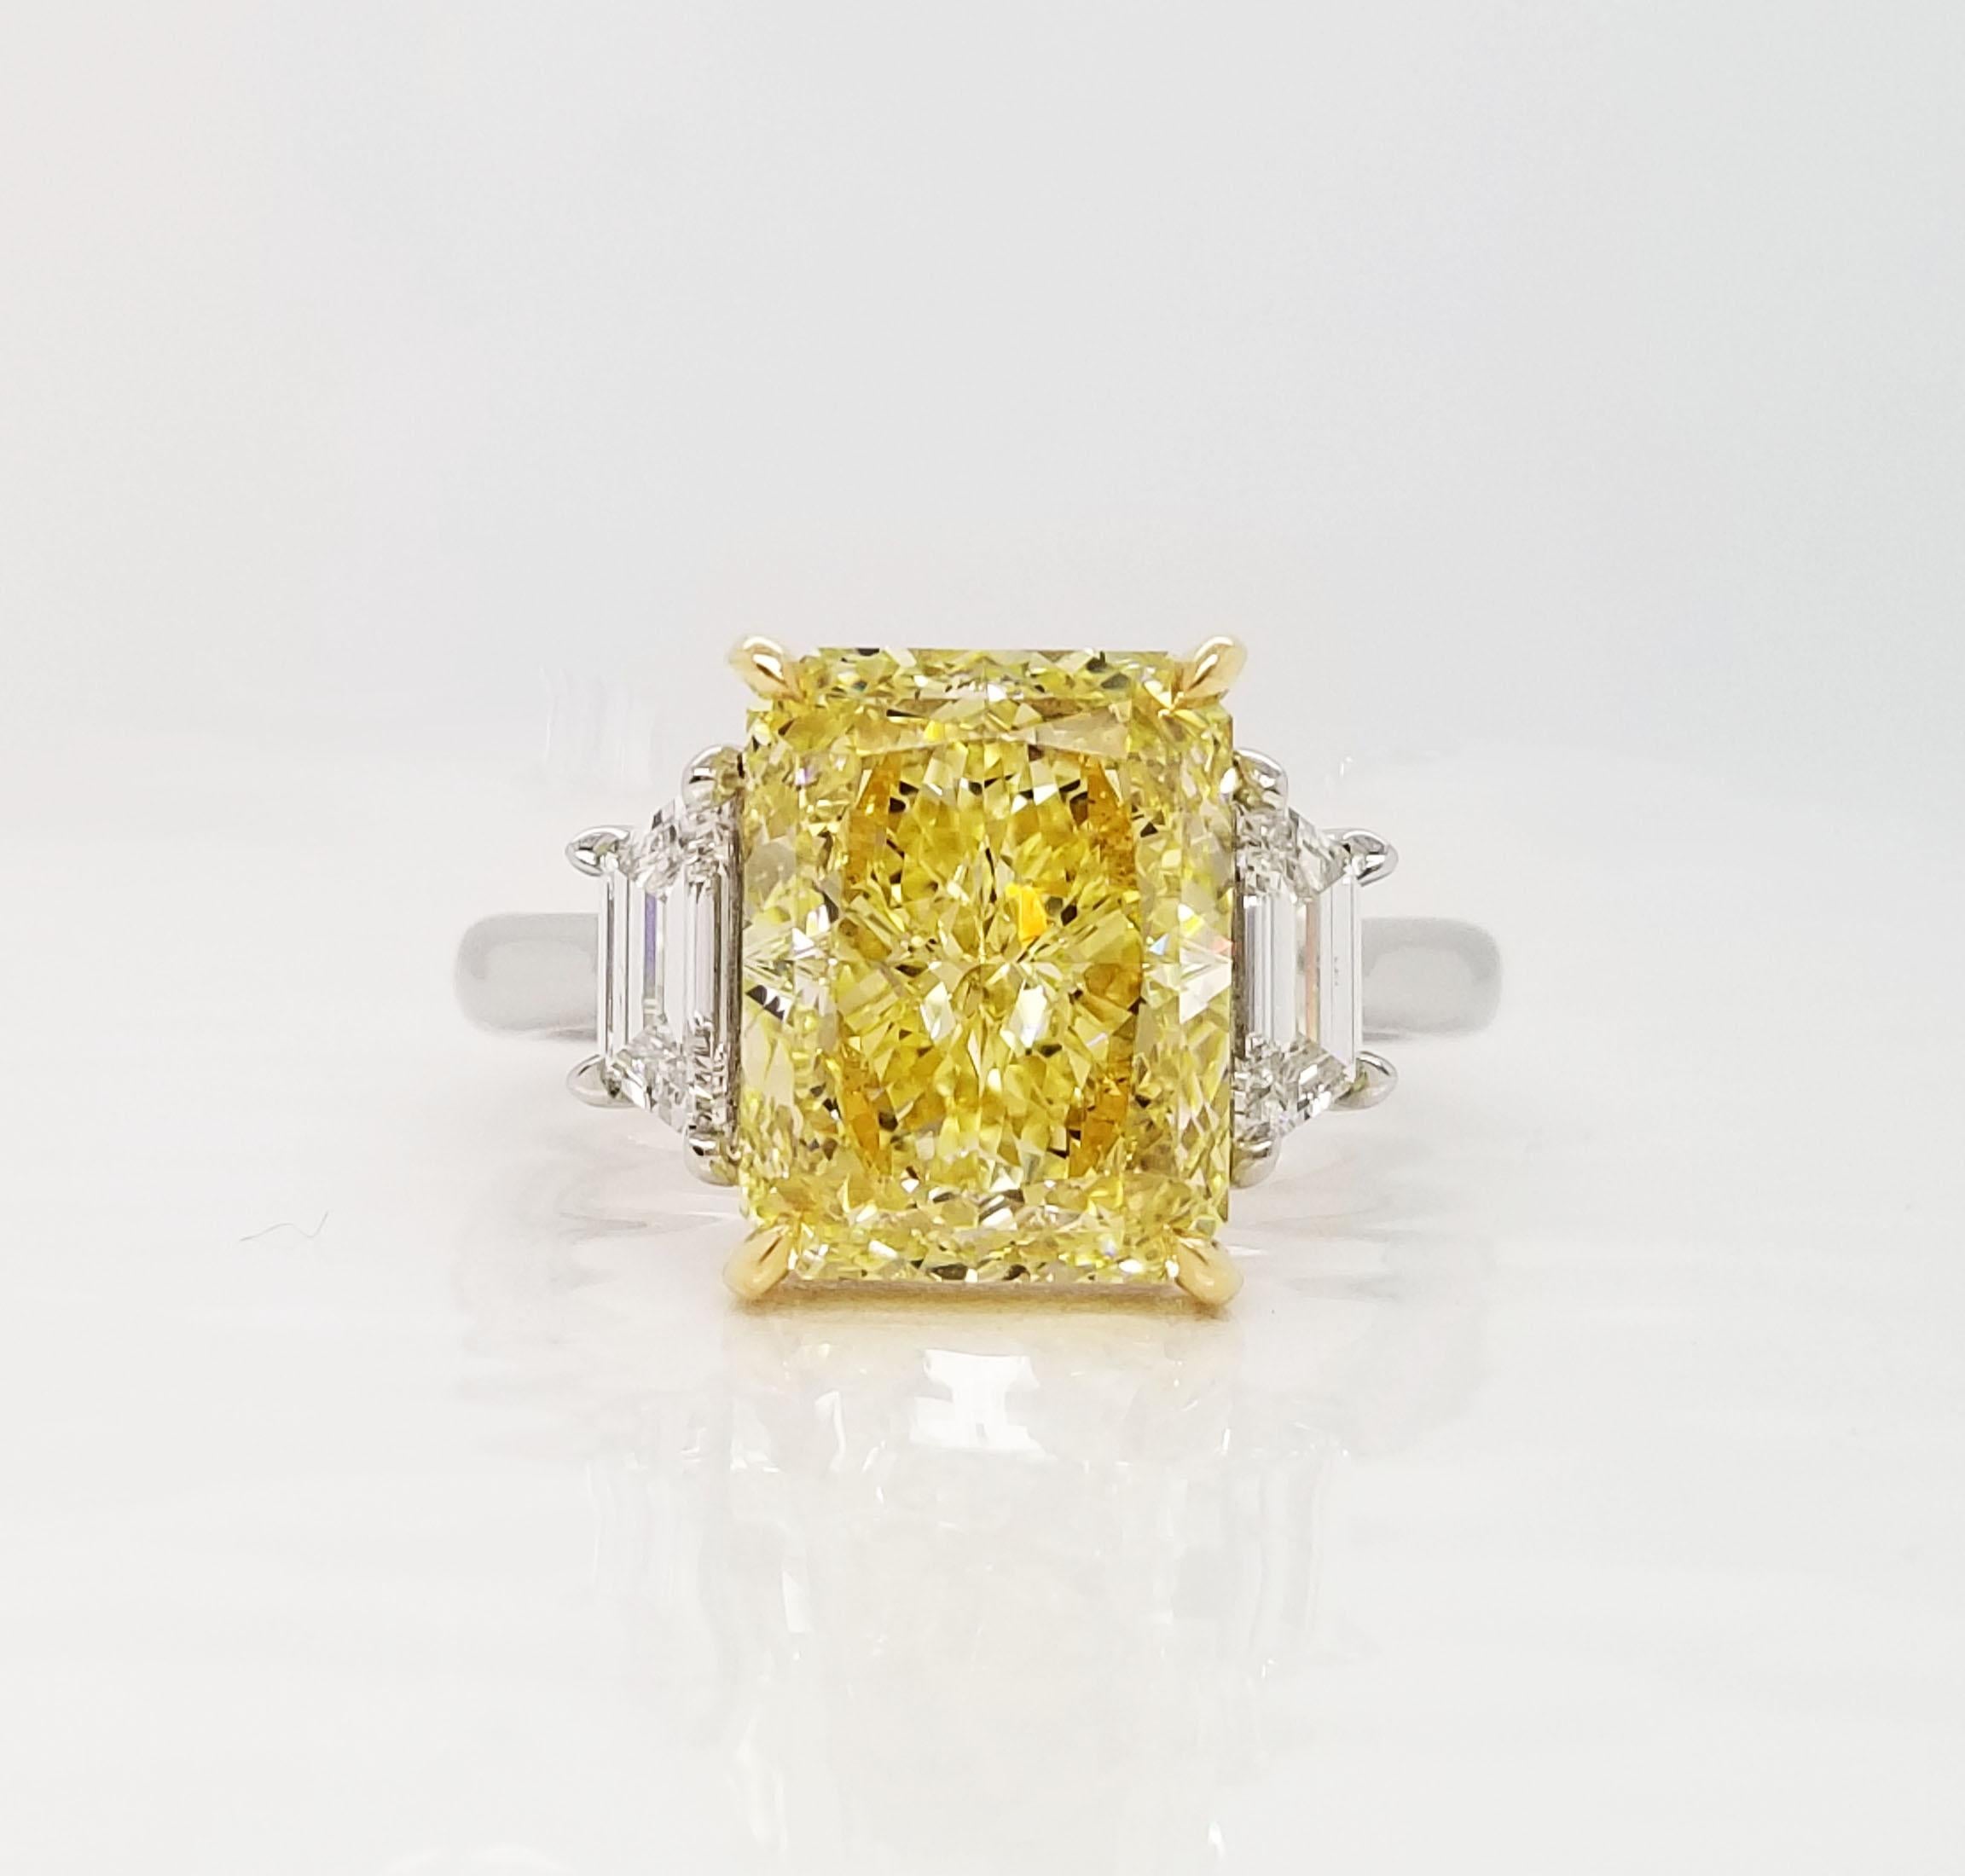 From SCARSELLI, this beautiful engagement ring features an over 5-carat Fancy Intense Yellow radiant cut diamond of VS2 clarity (see certificate picture for detailed stone's information) flanked by 2 trapezoids totaling 0.66ct (0.33 each). Handmade